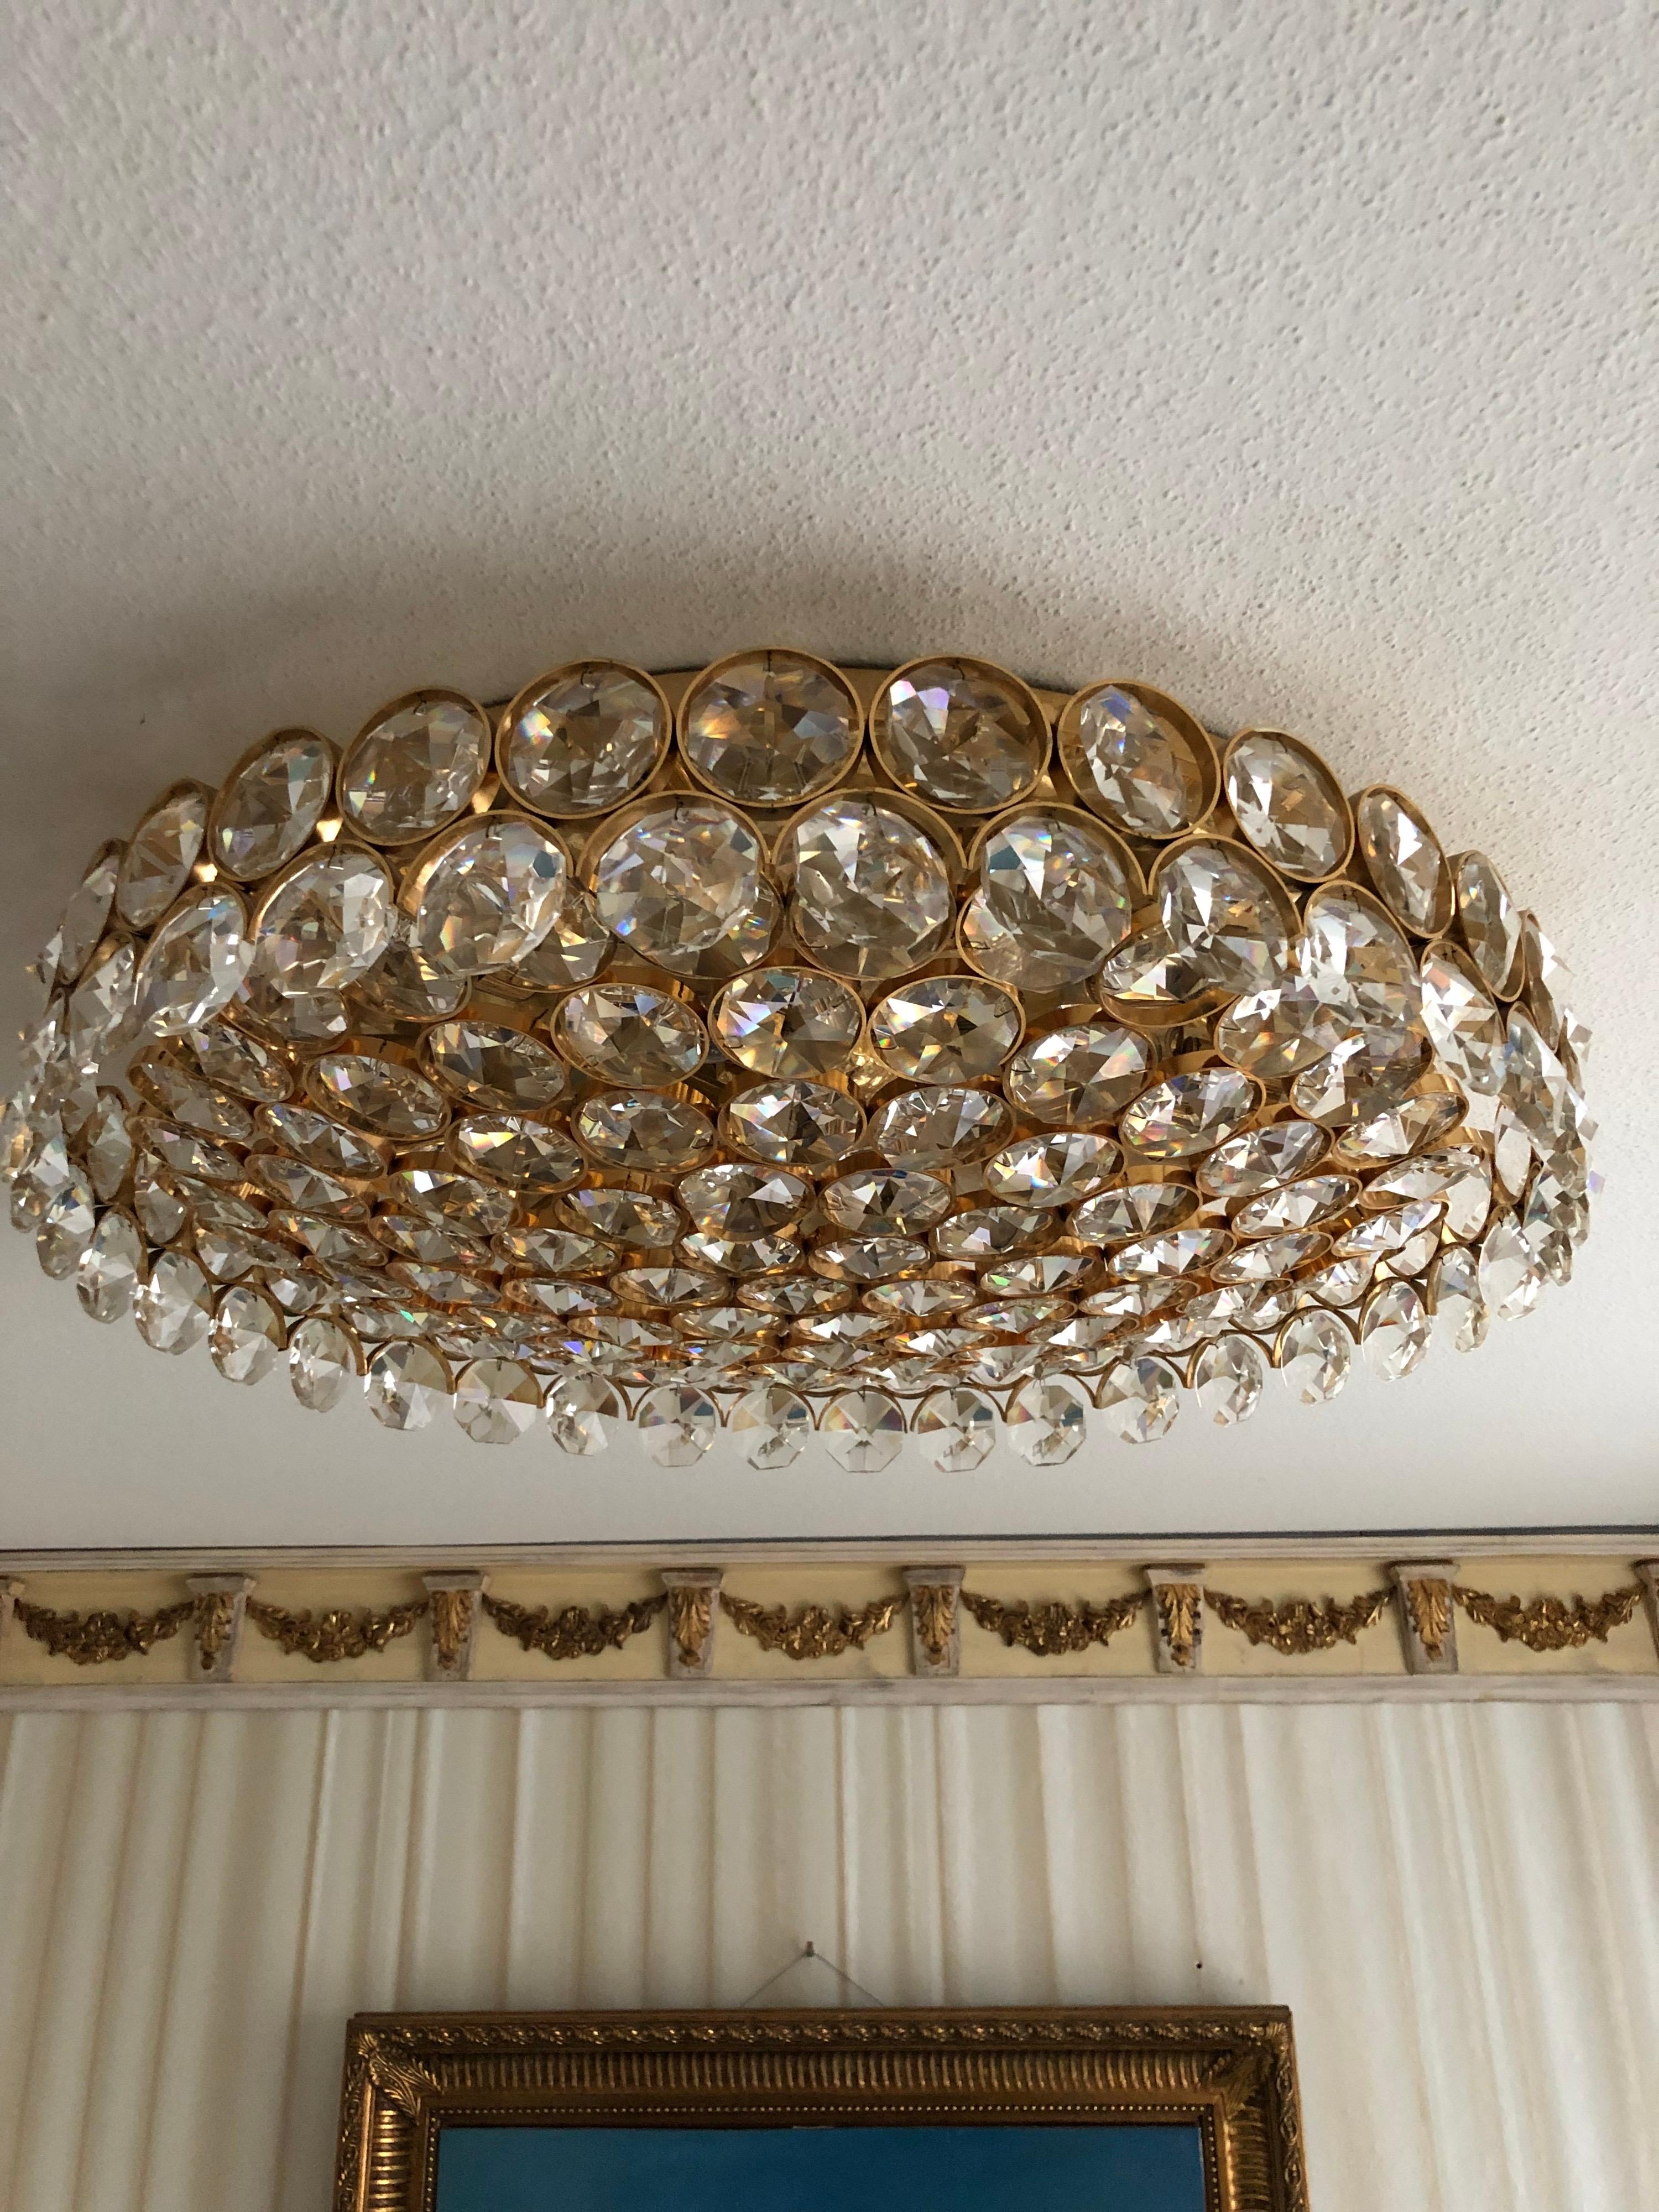 Fantastically Palwa ceiling lamp /plafoniere brass with large crystal

Unique large plafionere made of gold-plated brass and large faceted crystal stones. Crystal clear stones made of 30% lead crystal.

Extremely high quality and heavily processed